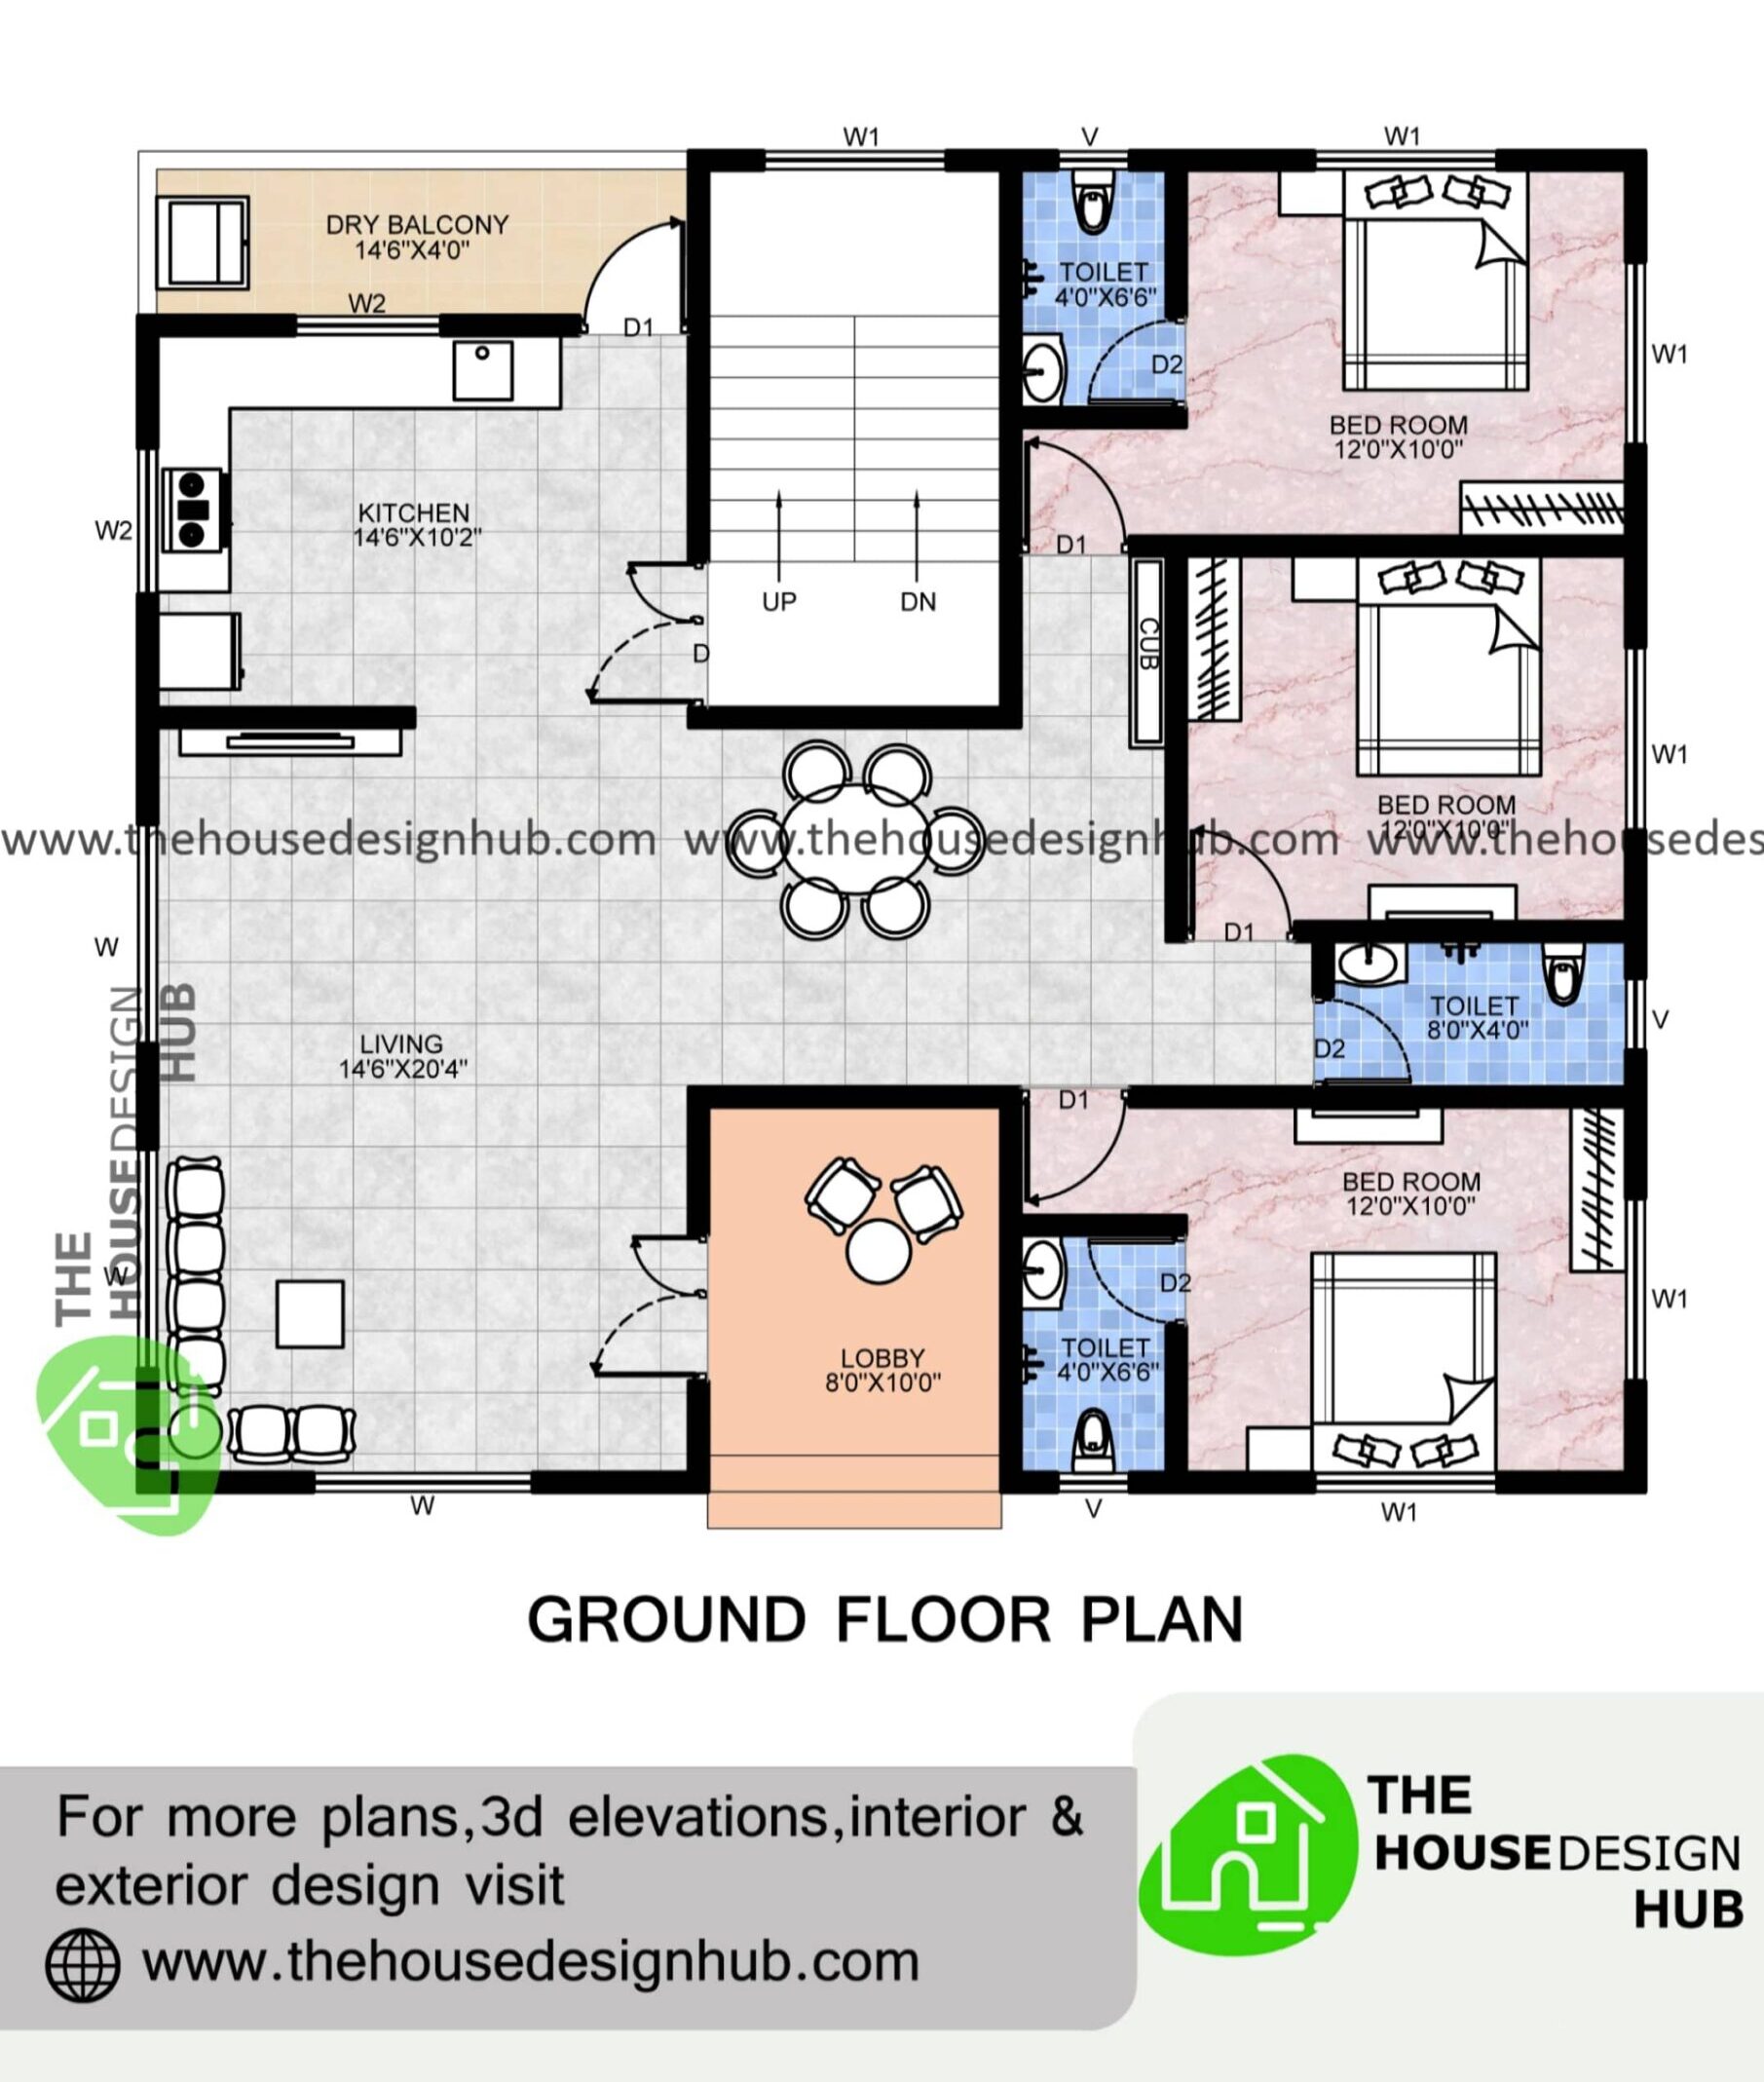 41 X 36 Ft 3 Bedroom Plan In 1500 Sq Ft | The House Design Hub